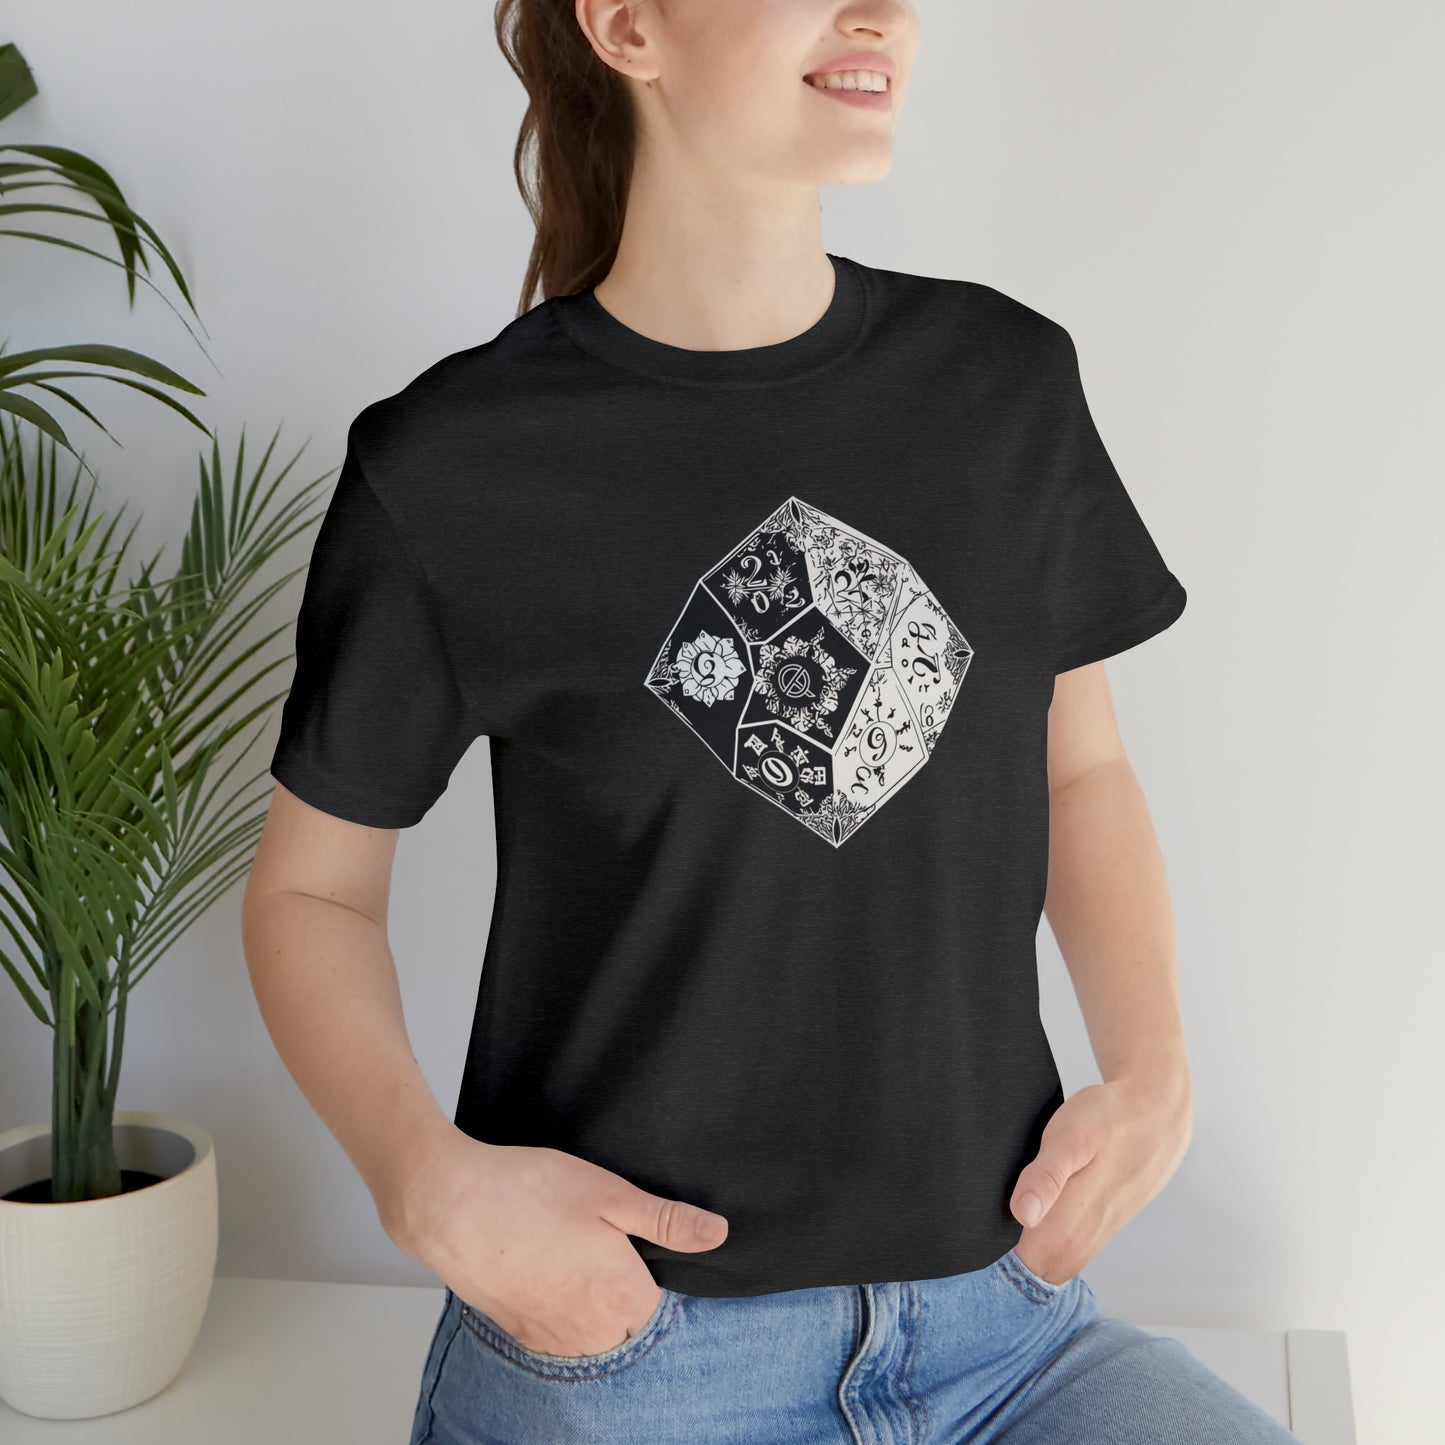 dark-grey-heather-quest-thread-tee-shirt-with-large-black-and-white-artistic-dice-on-center